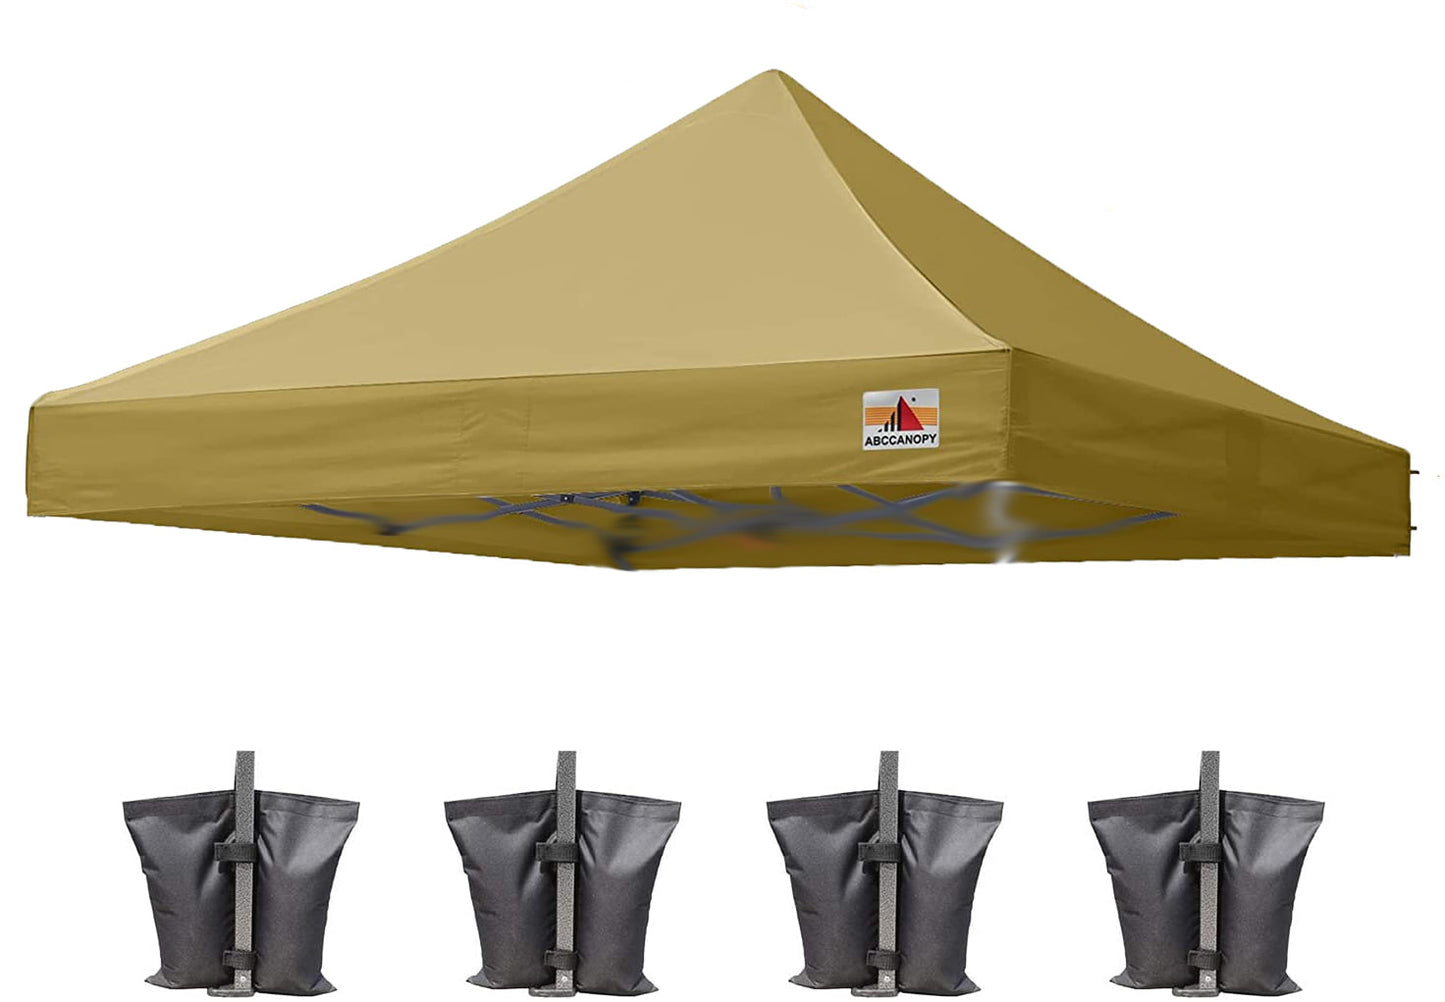 In this photograph, you'll find the Beige Canopy TOP designed to complement the ABCCANOPY Commercial Deluxe 10x10 Canopy. Its clean and pristine appearance is perfect for a variety of outdoor occasions.